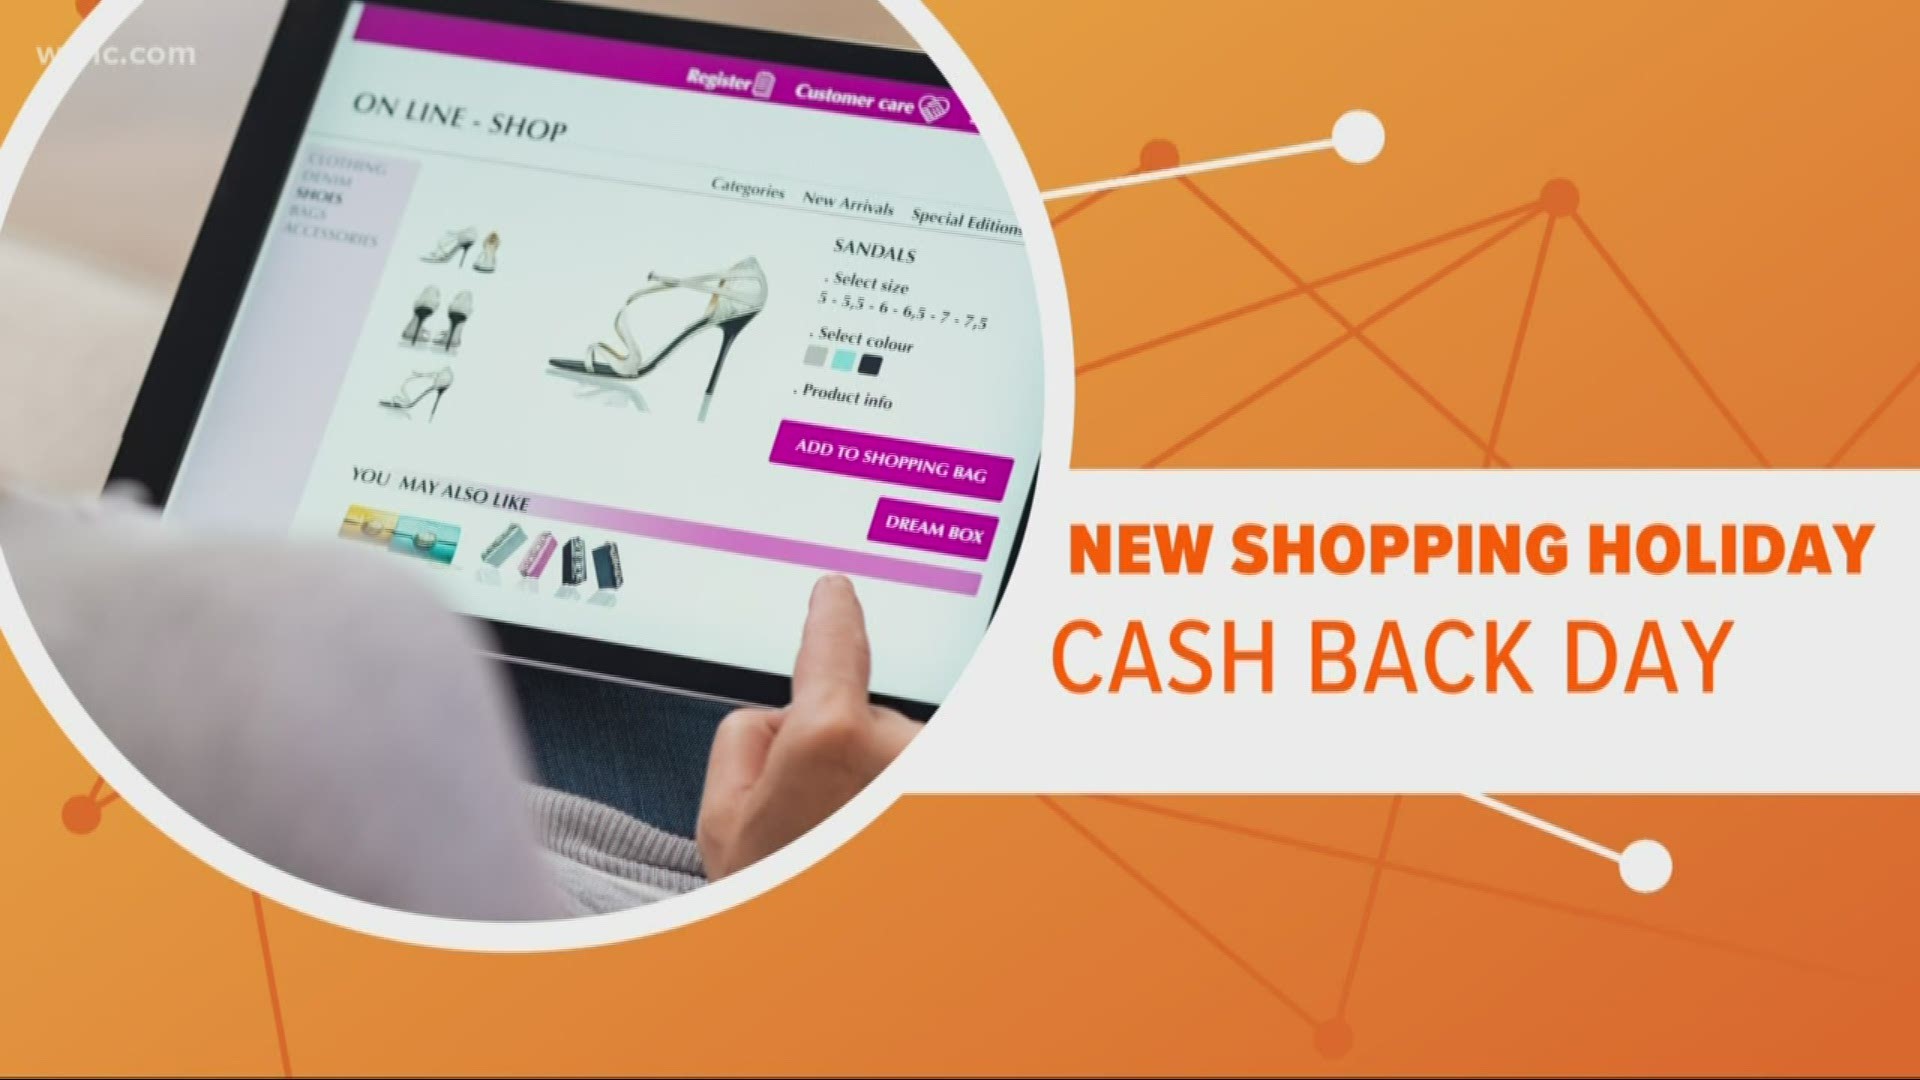 Move over Black Friday, there's a new holiday shopping day that wants to put money back in your wallet. It's called Cash Back Day.